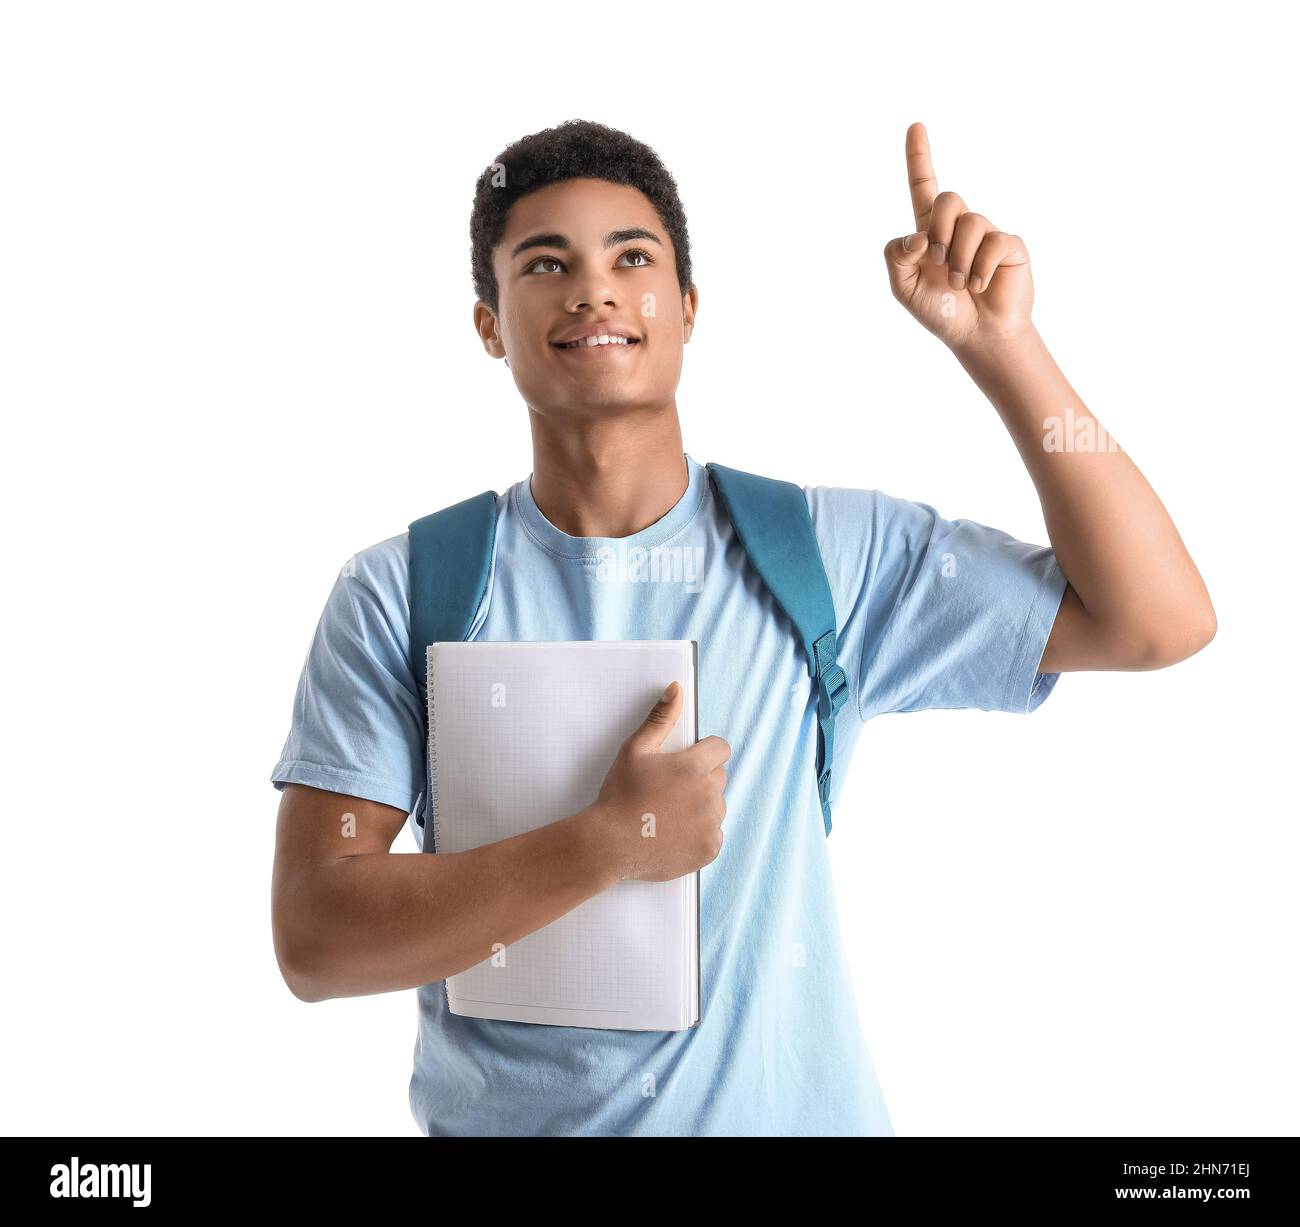 Male African-American student with notebook pointing at something on white background Stock Photo